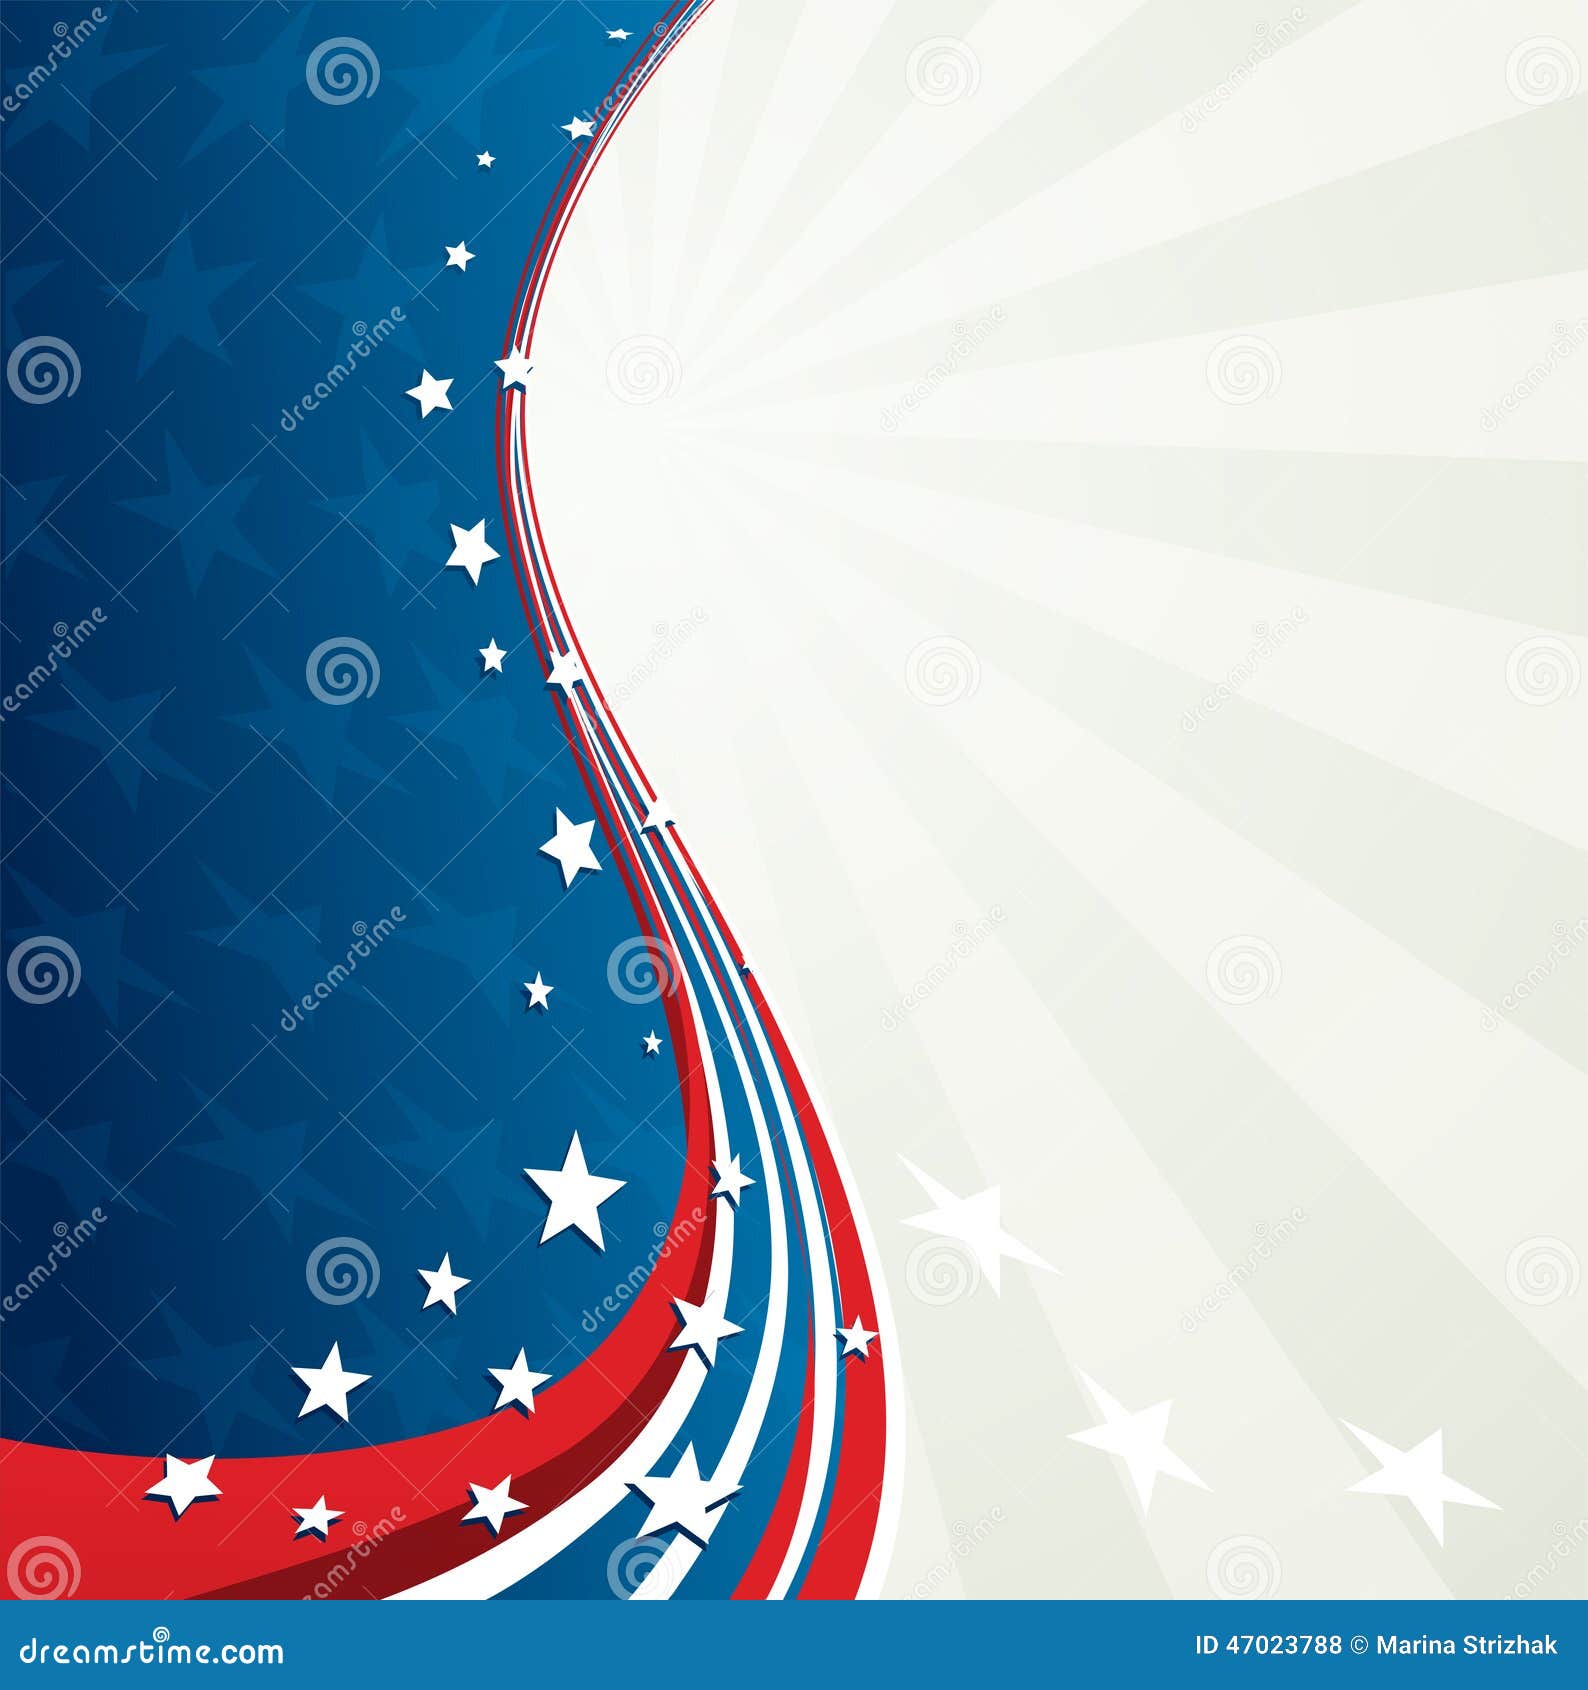 independence day patriotic background